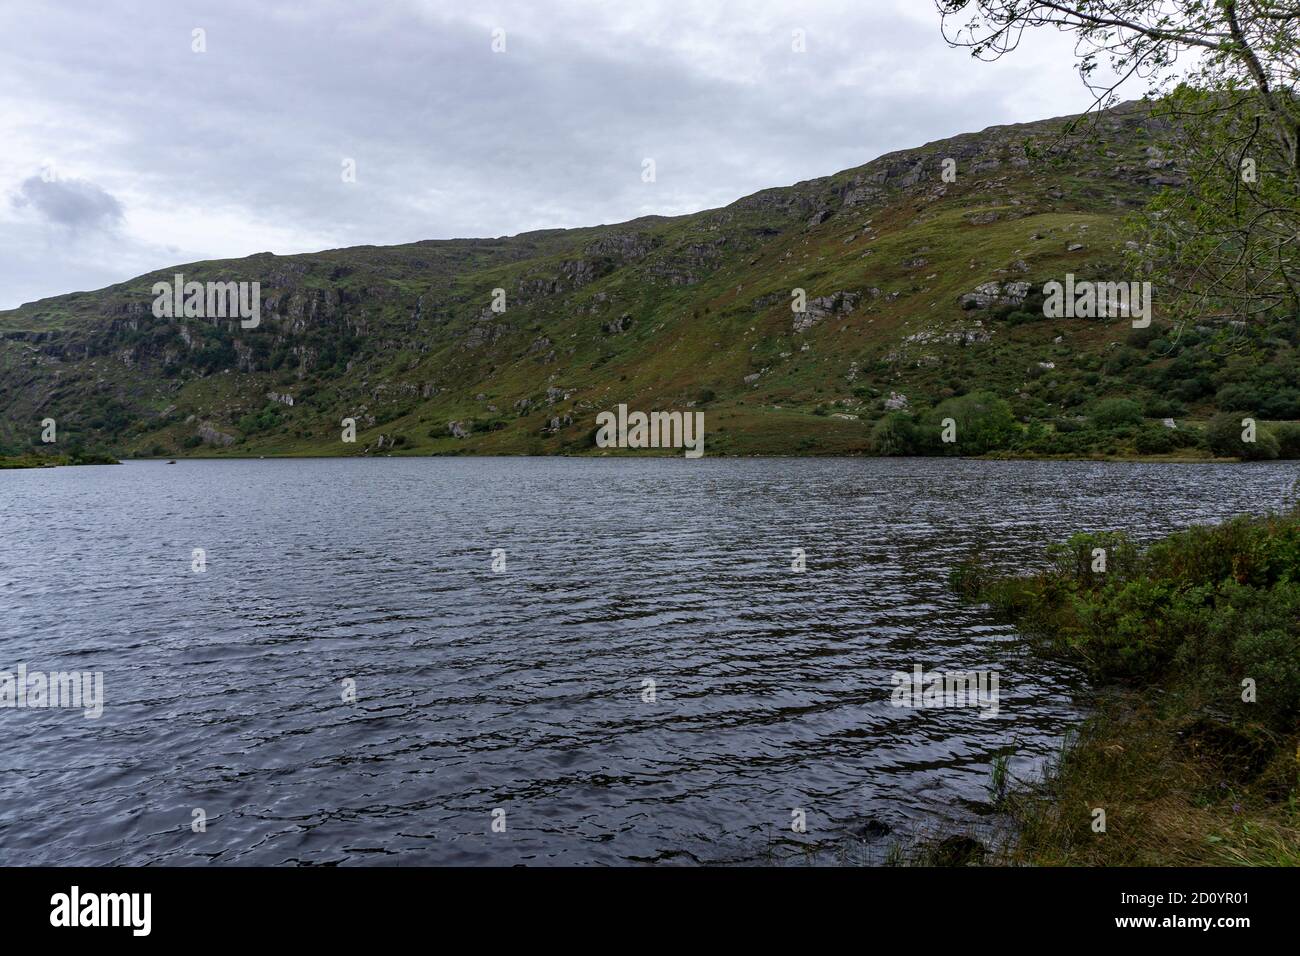 The lake in Googane Barra in Cork, Ireland. It is situated beside St Finbarr’s Oratory and church and surrounded by hills of natural beauty. Stock Photo